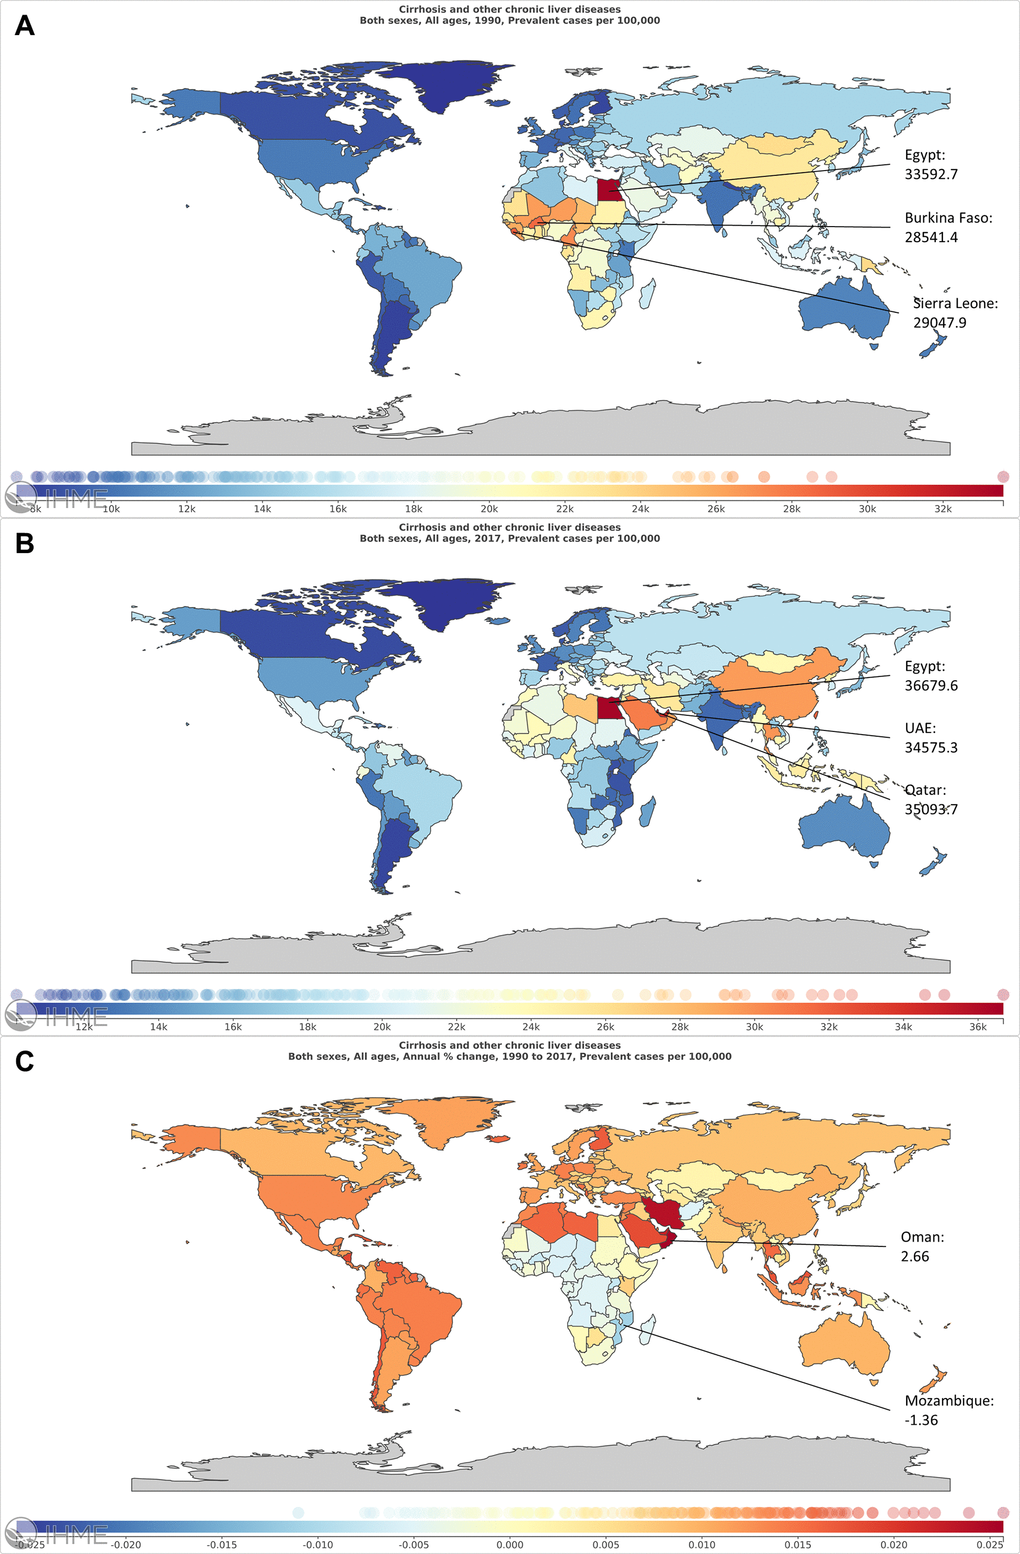 The global burden of liver cirrhosis in 195 countries and territories. (A) The ASR of liver cirrhosis in 1990. (B) The ASR of liver cirrhosis in 2017. (C) The EAPC of liver cirrhosis from 1990 to 2017.